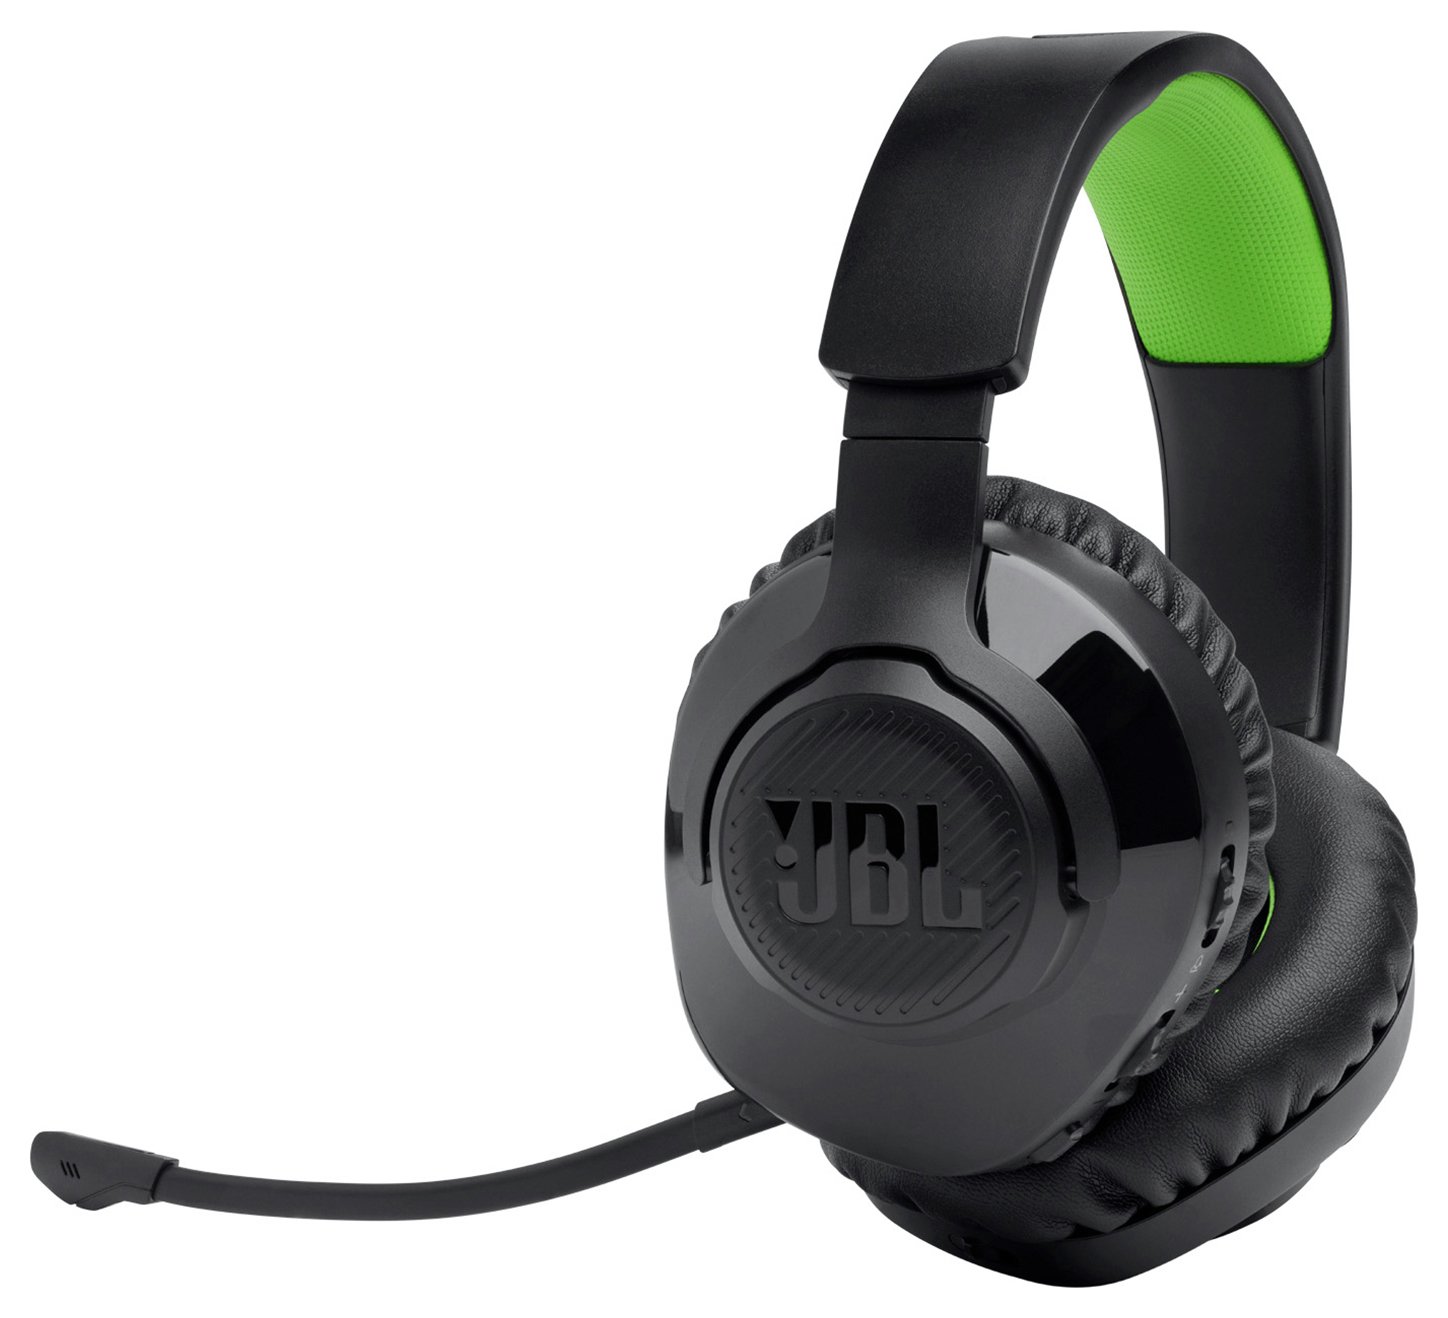 JBL Quantum 400 Premium Wired Over-Ear Gaming Headphones with USB and Game-Chat Balance Dial - Black